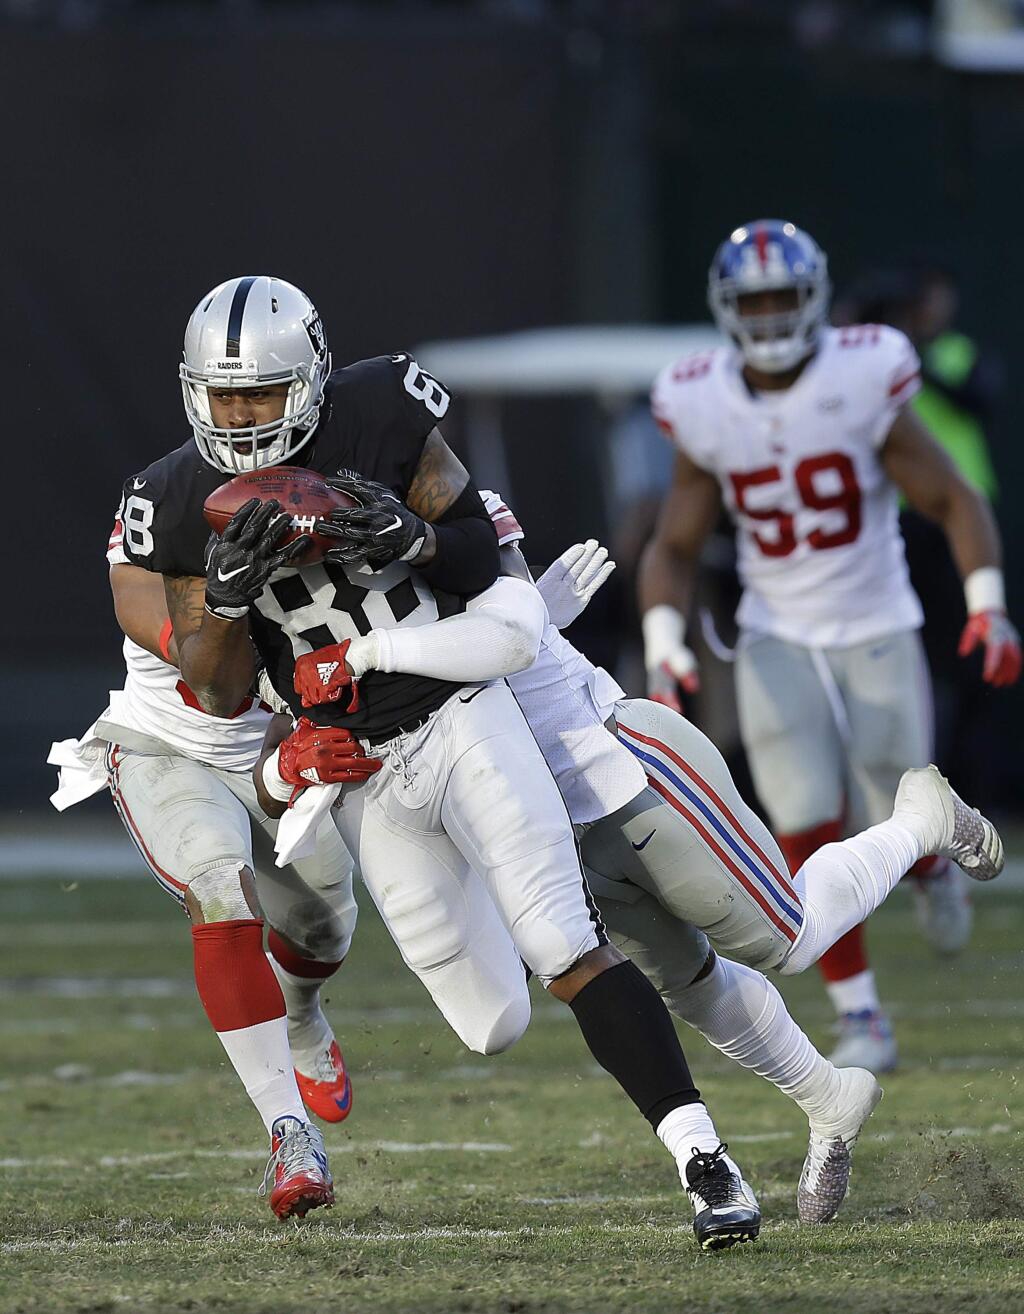 Oakland Raiders tight end Clive Walford (88) runs against the New York Giants during an NFL football game in Oakland, Calif., Sunday, Dec. 3, 2017. (AP Photo/Ben Margot)